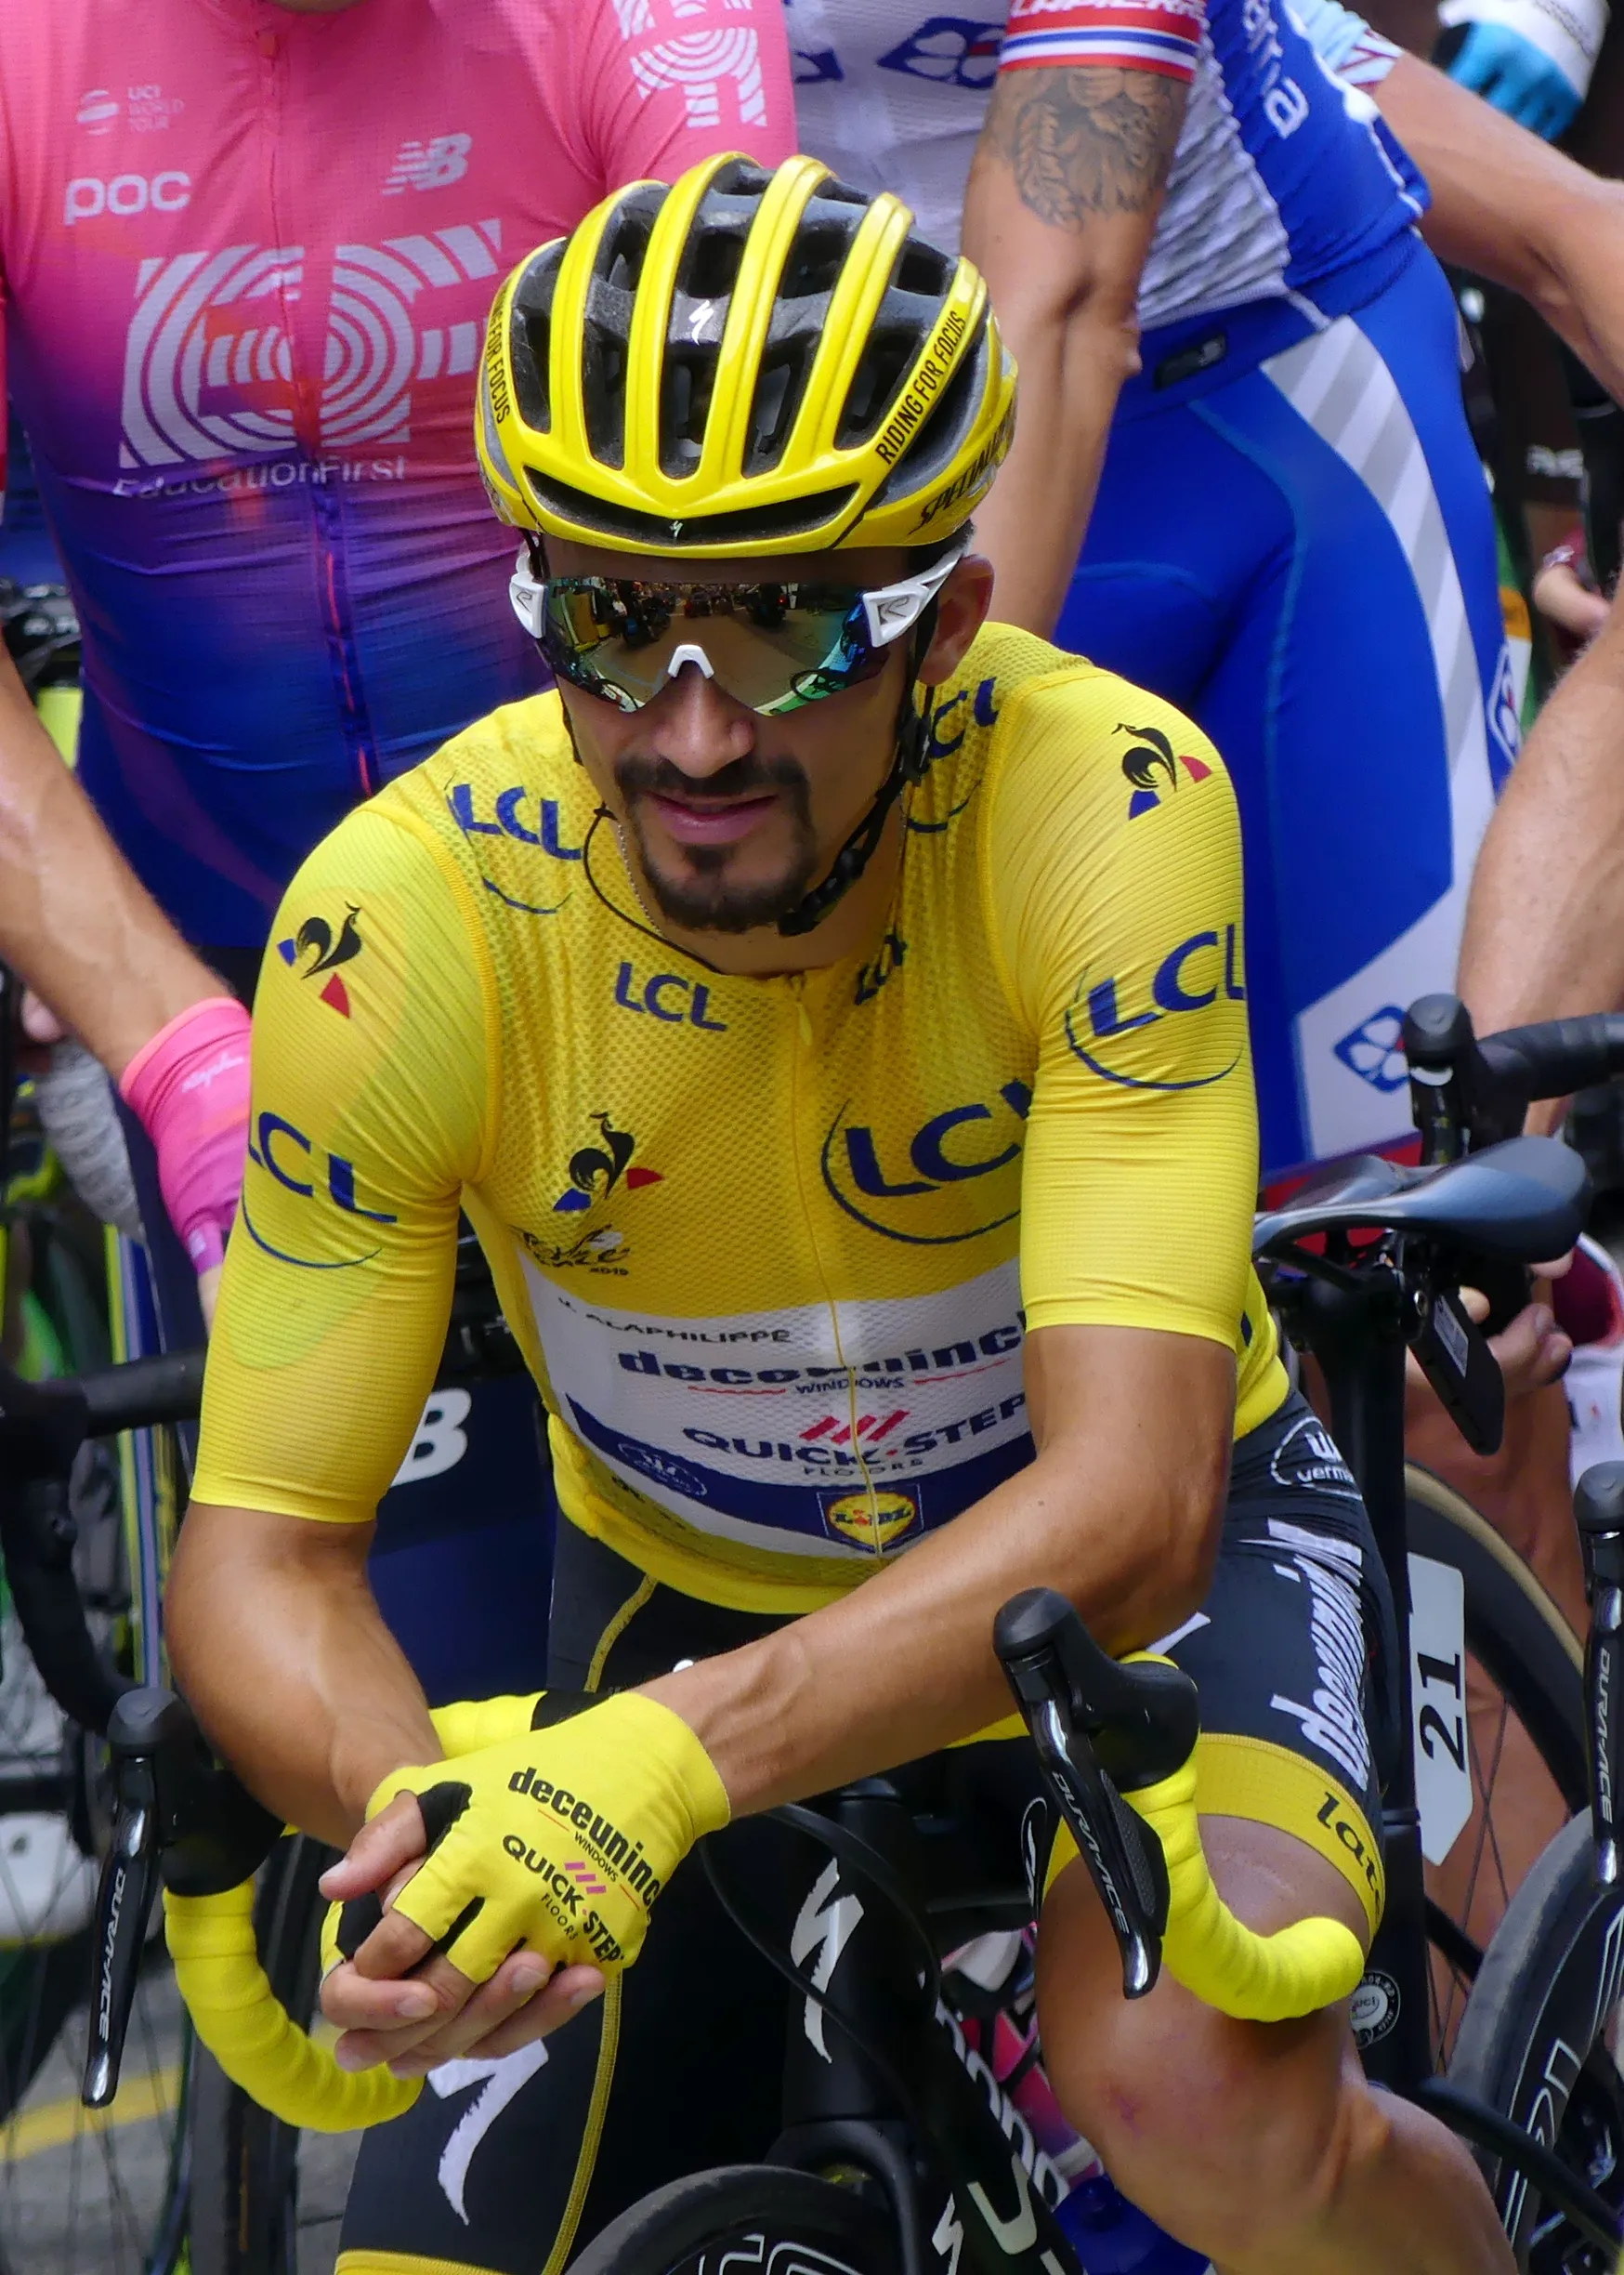 Photo showing: Sight of the French bike rider Julian Alaphilippe wearing the yellow jersey on the start of the 2019 Tour de France 19th step, in Saint-Jean-de-Maurienne, Savoie, France.